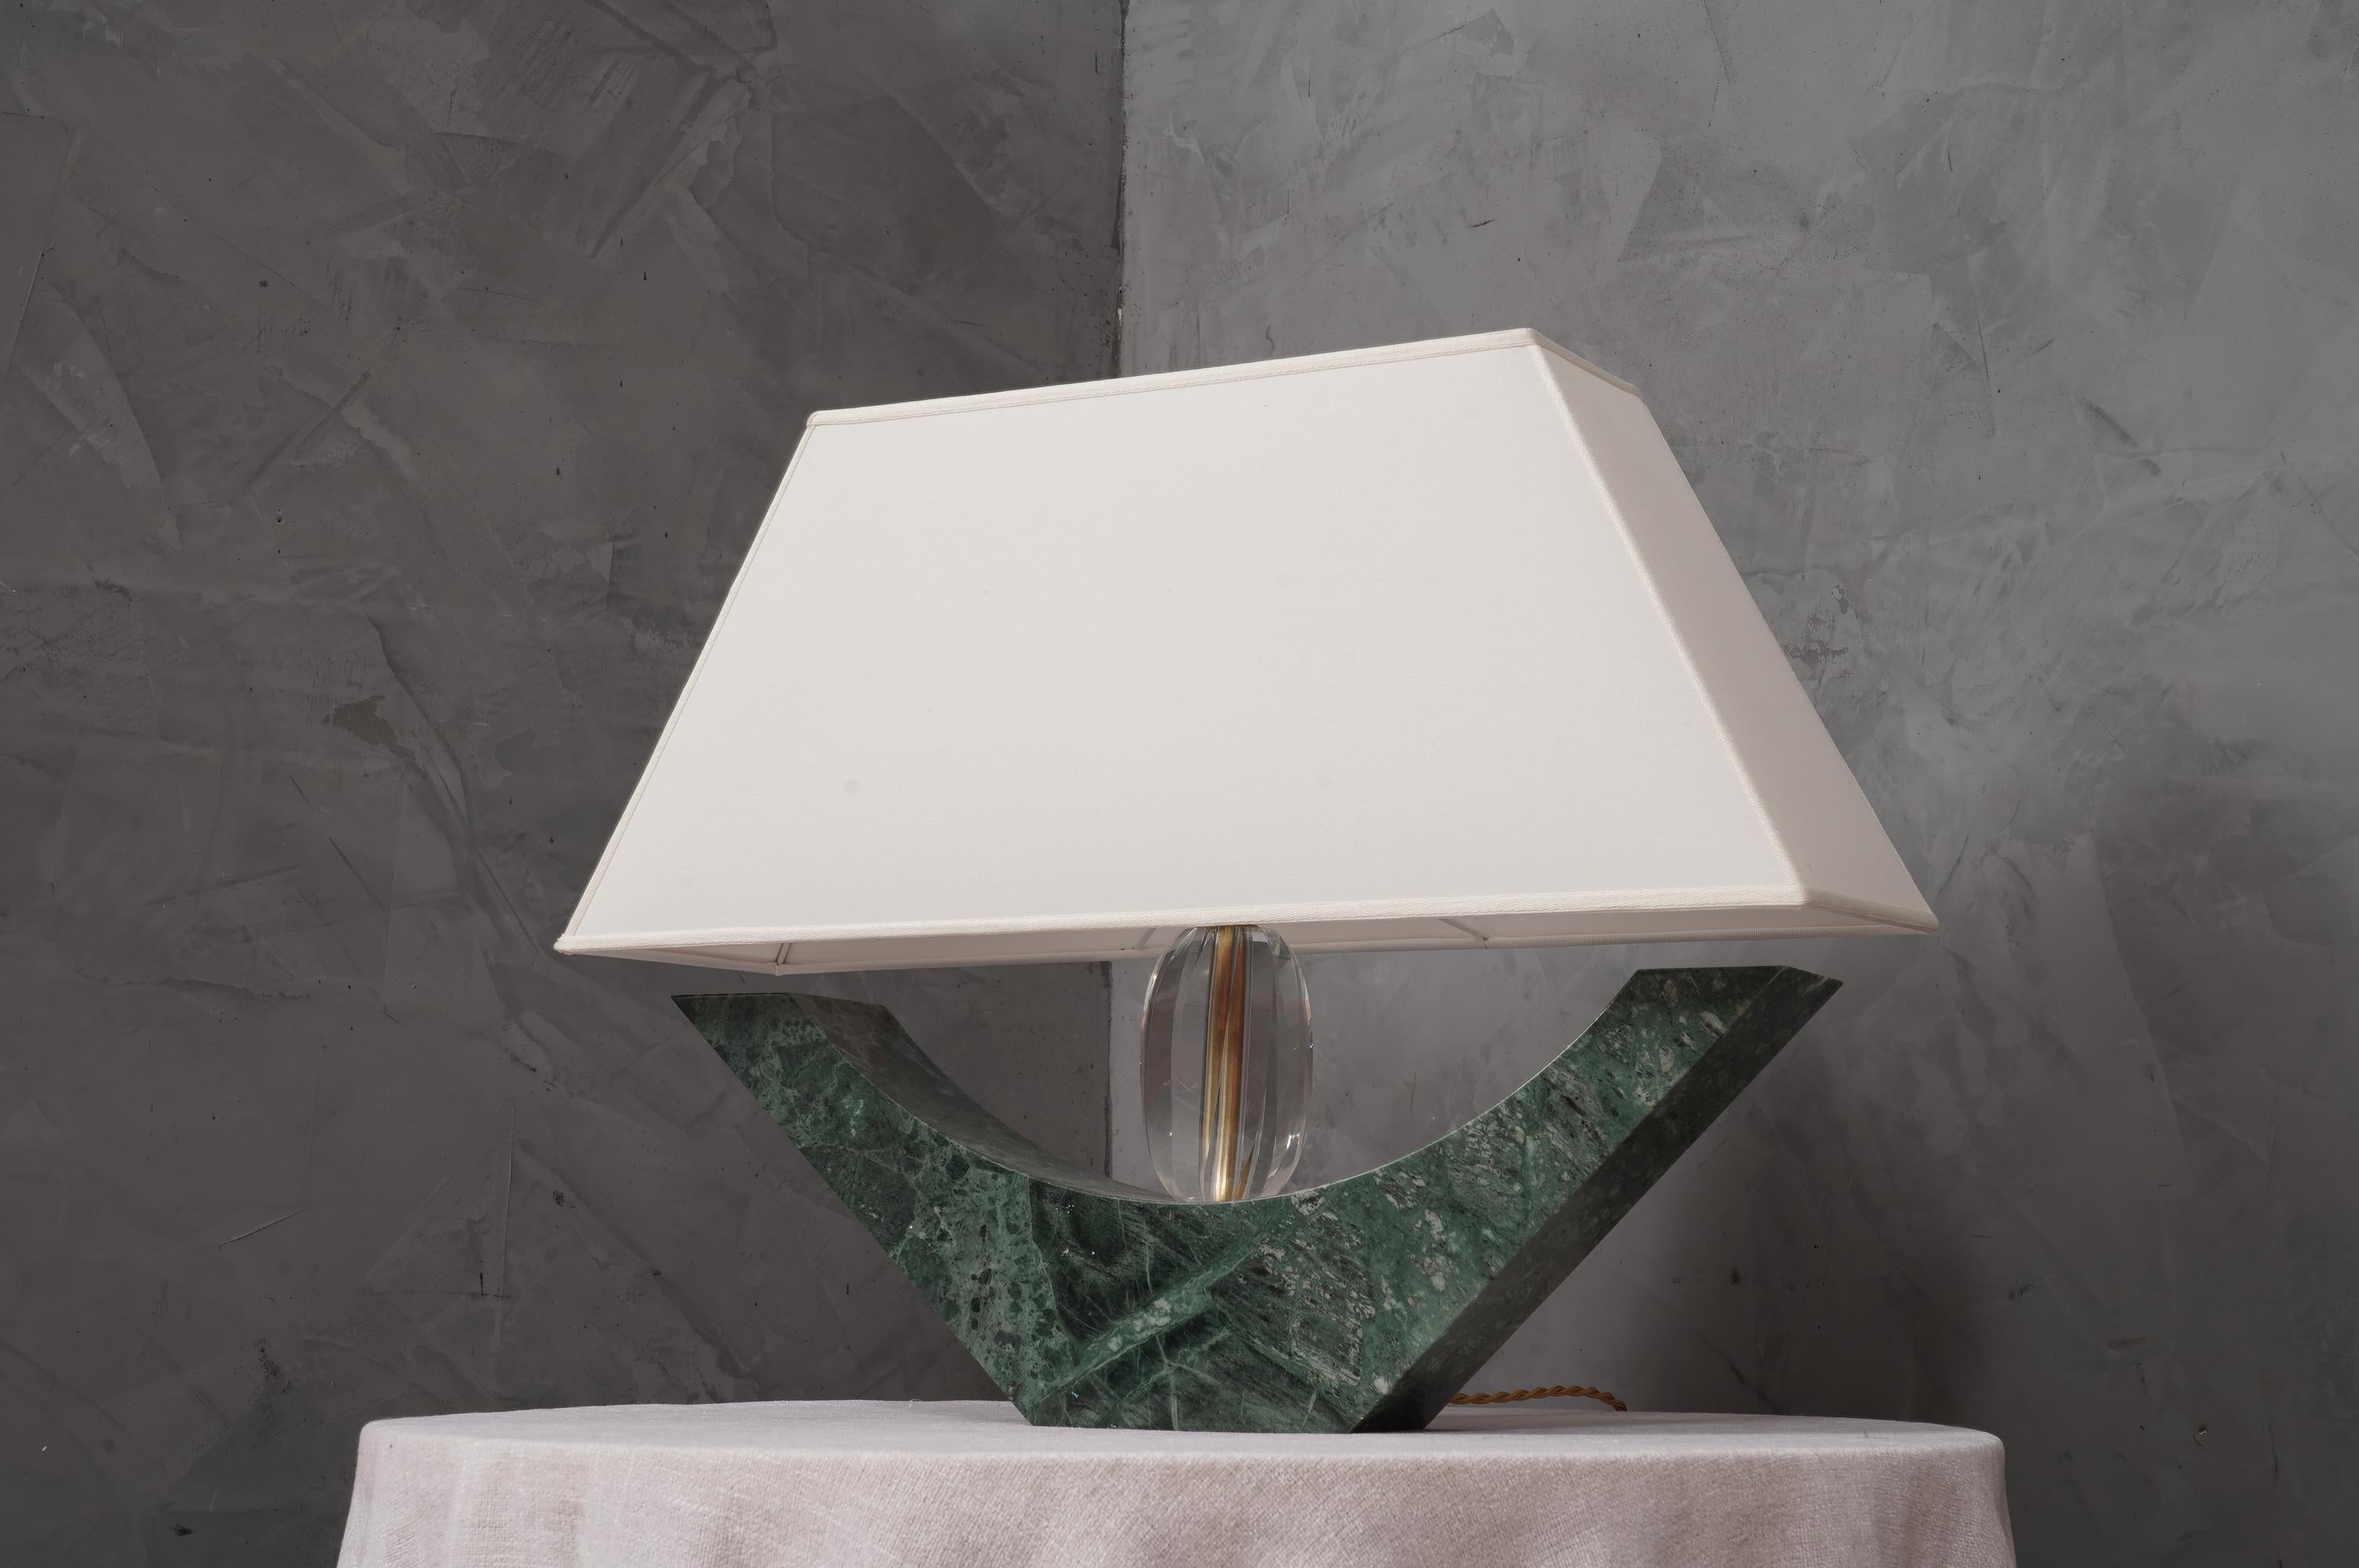 Indian Green Marble and Murano Glass Table Lamp, 2000 In Good Condition For Sale In Rome, IT